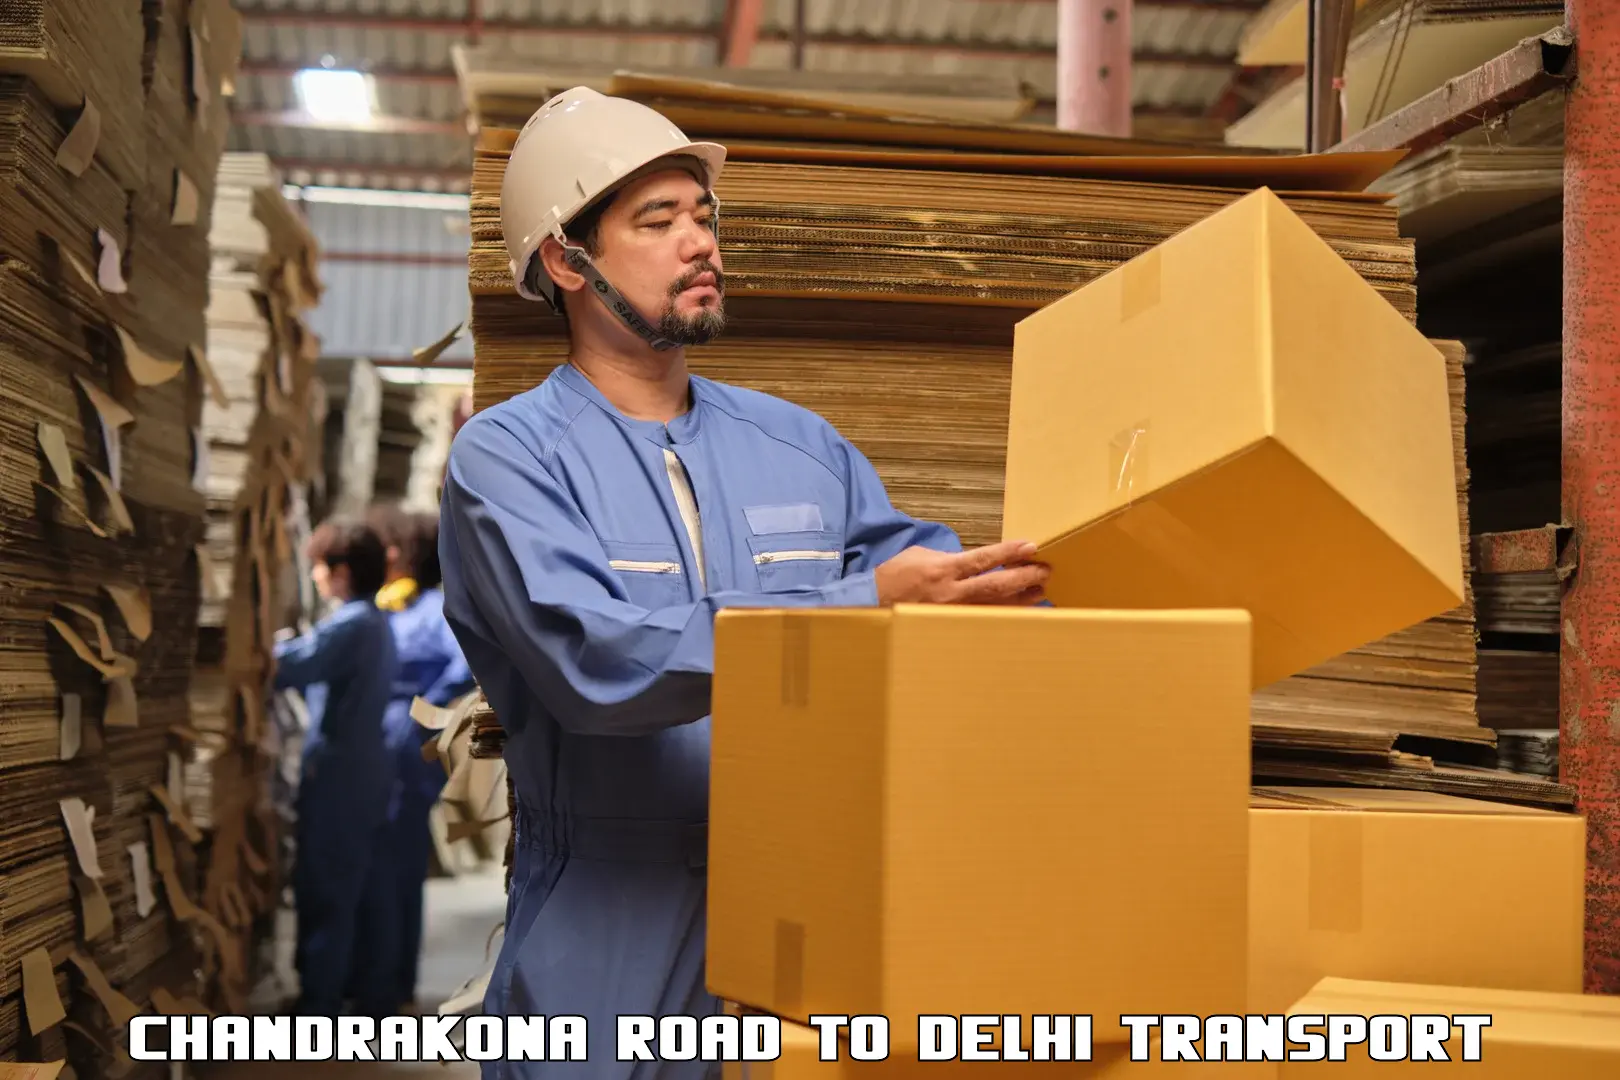 Goods delivery service Chandrakona Road to NCR